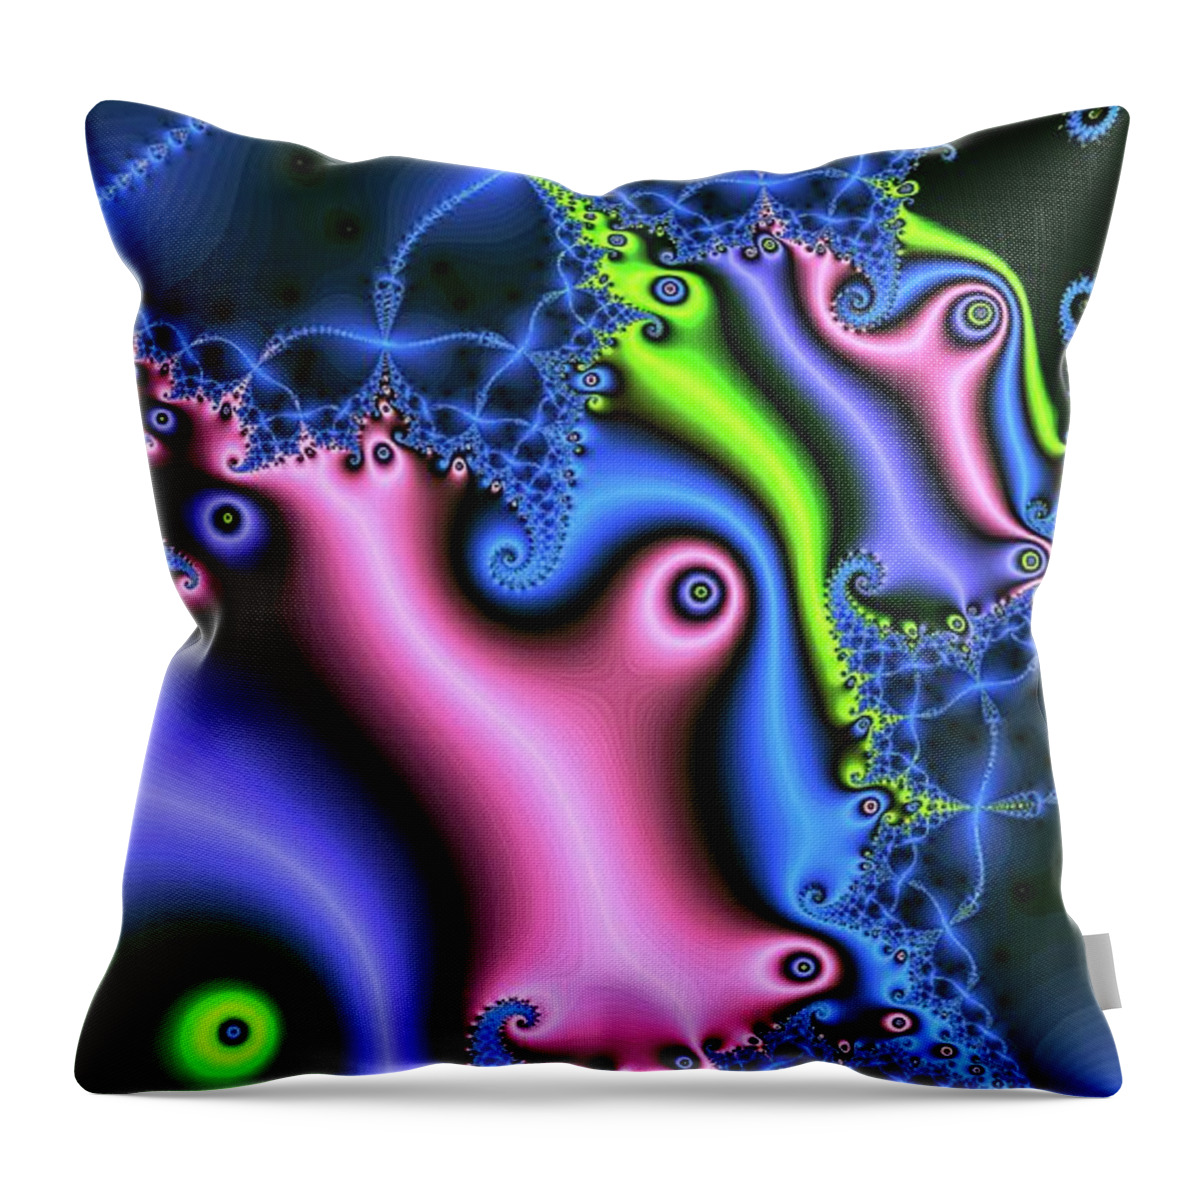 Fractal Throw Pillow featuring the digital art Glowing Blue Broken Arrow by Don Northup